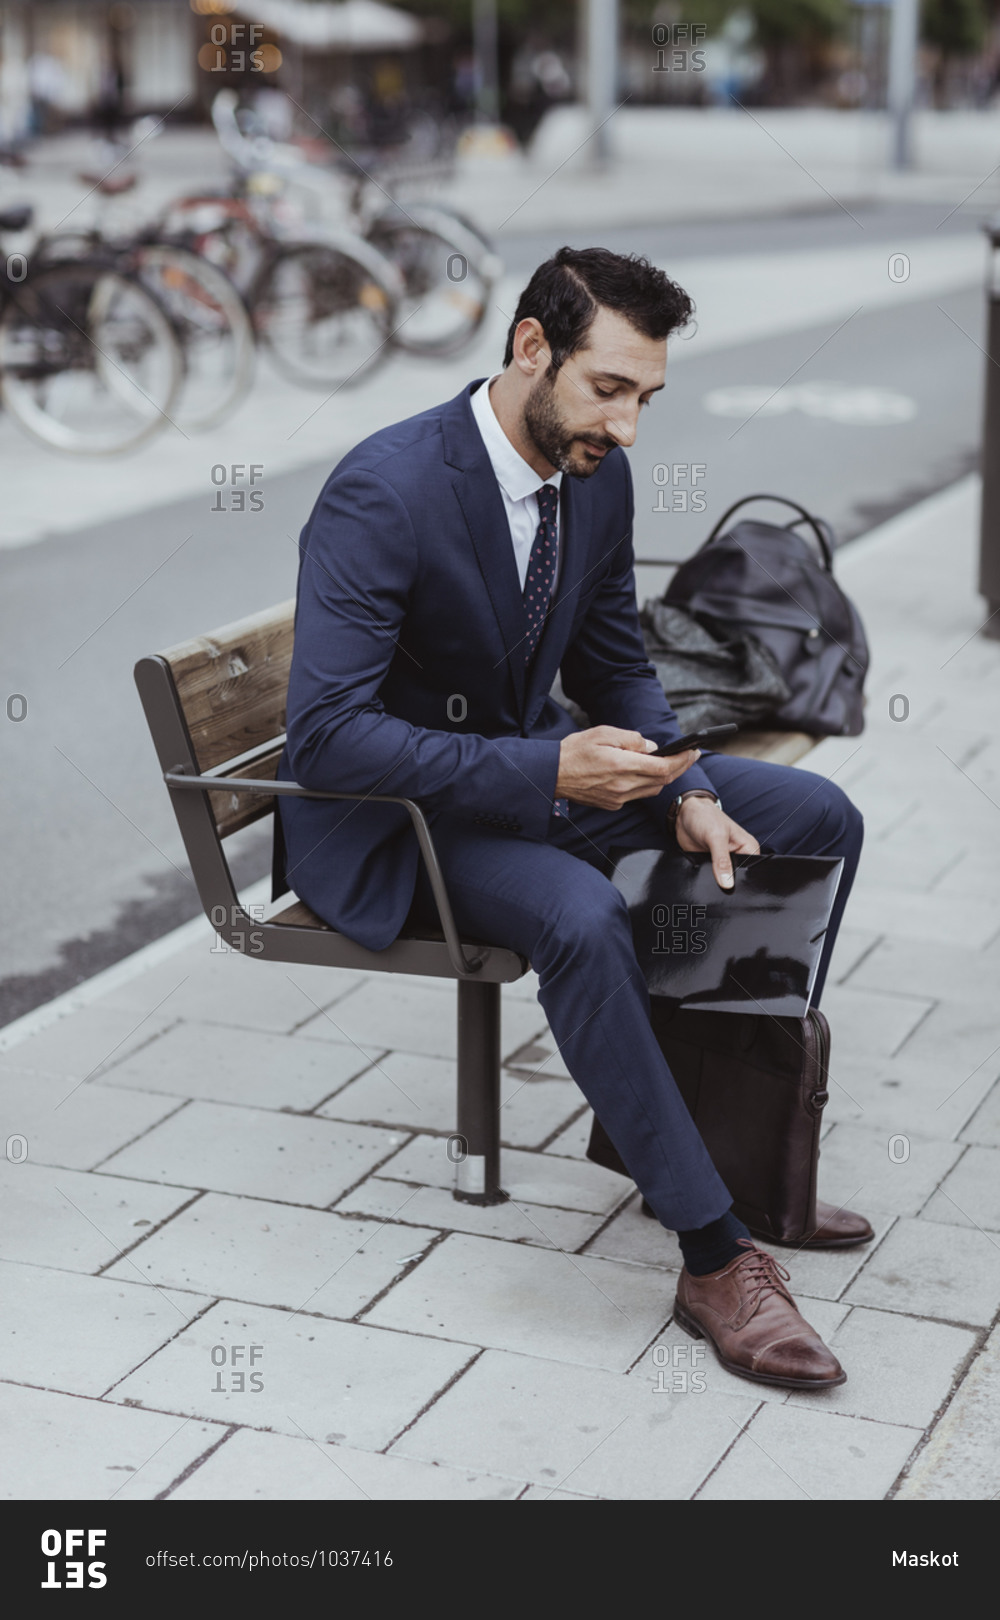 Entrepreneur with bag and file using smart phone while sitting on bench in city